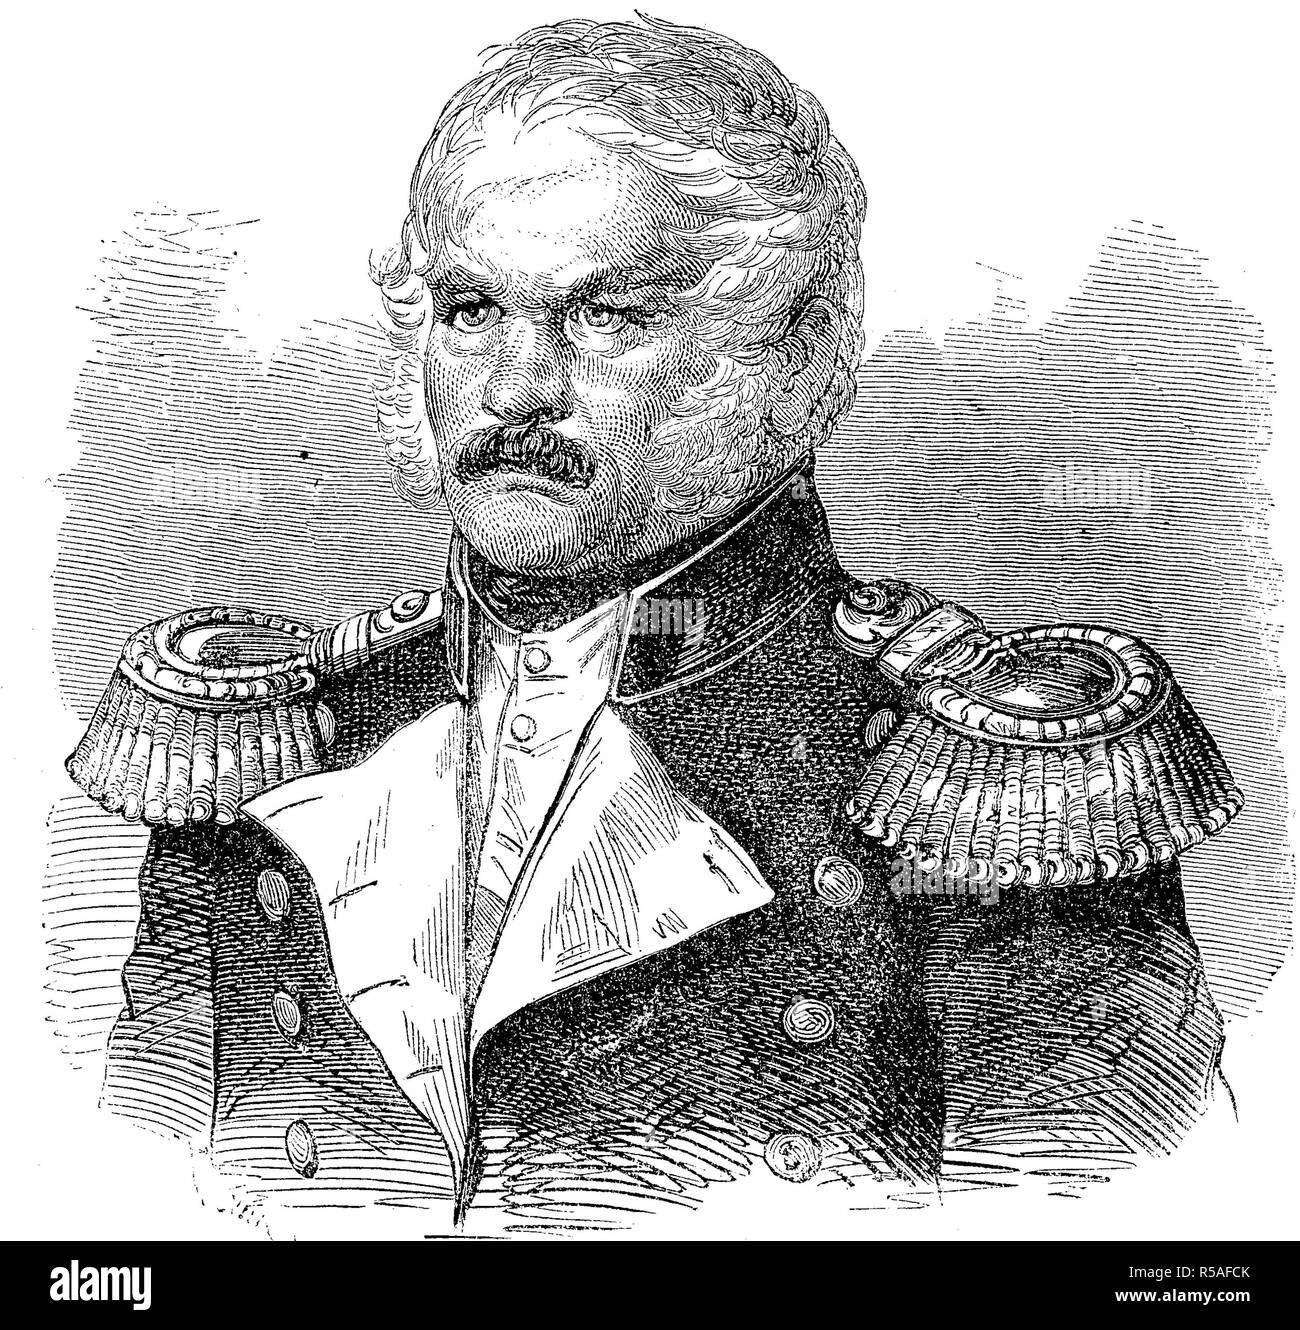 Aleksey Petrovich Yermolov or Jermolov, Juni 1777, April 1861, general of the 19th century who commanded Russian troops in the Stock Photo